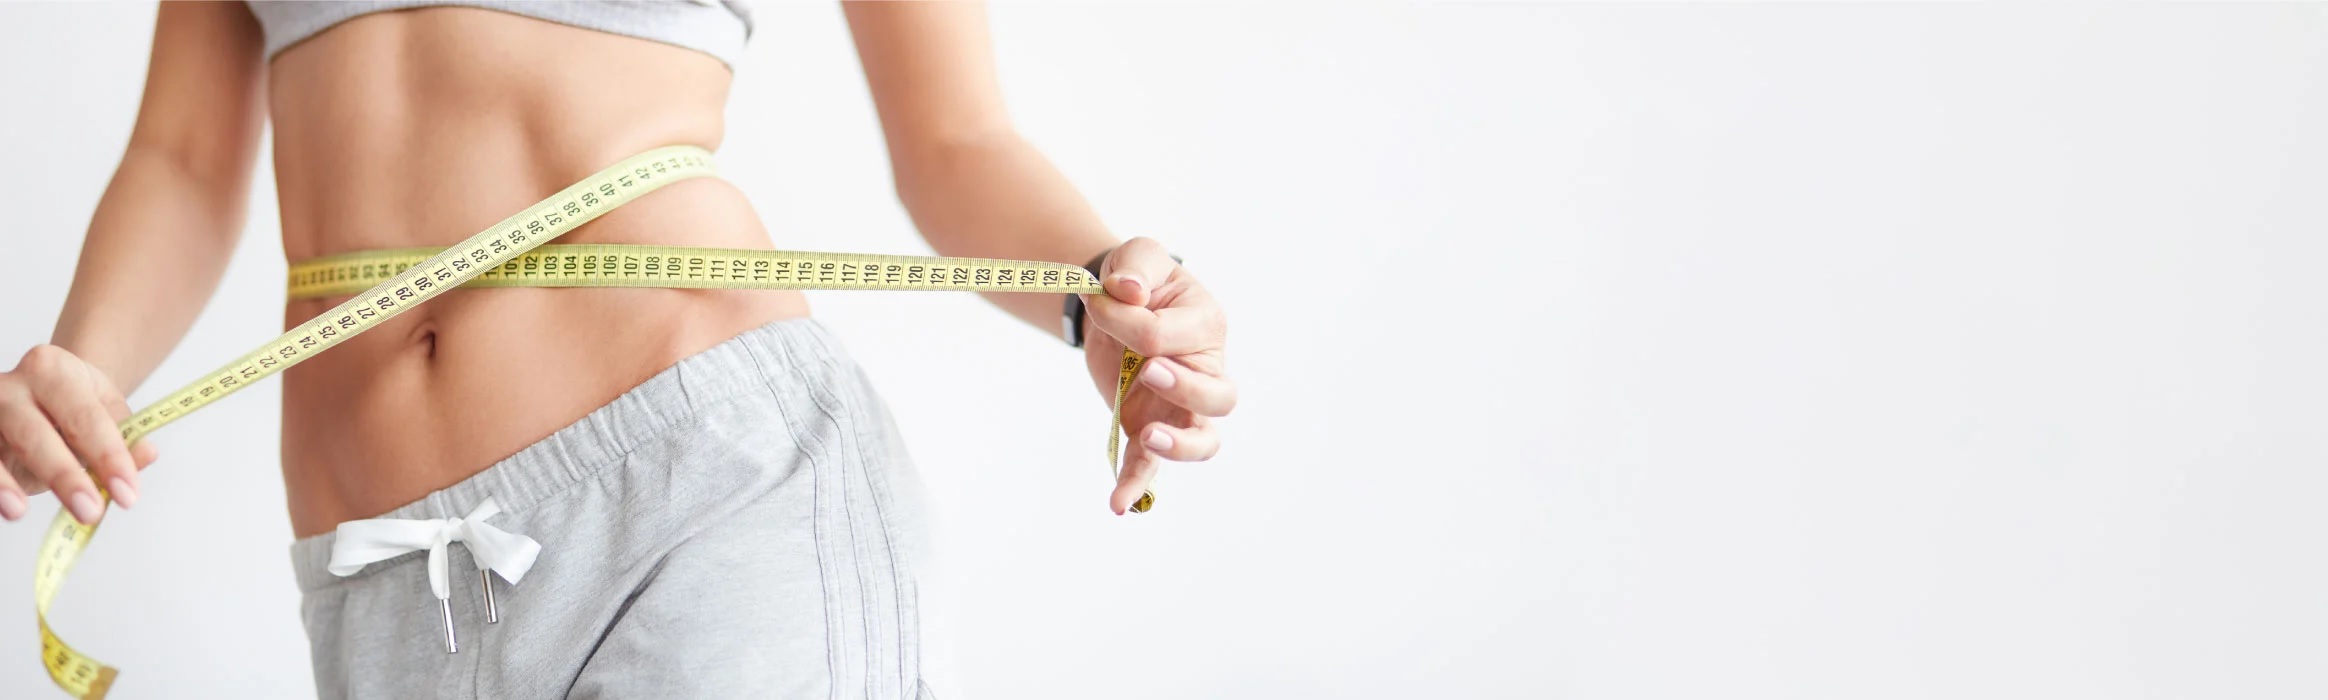 Benefits of weight loss for obesity